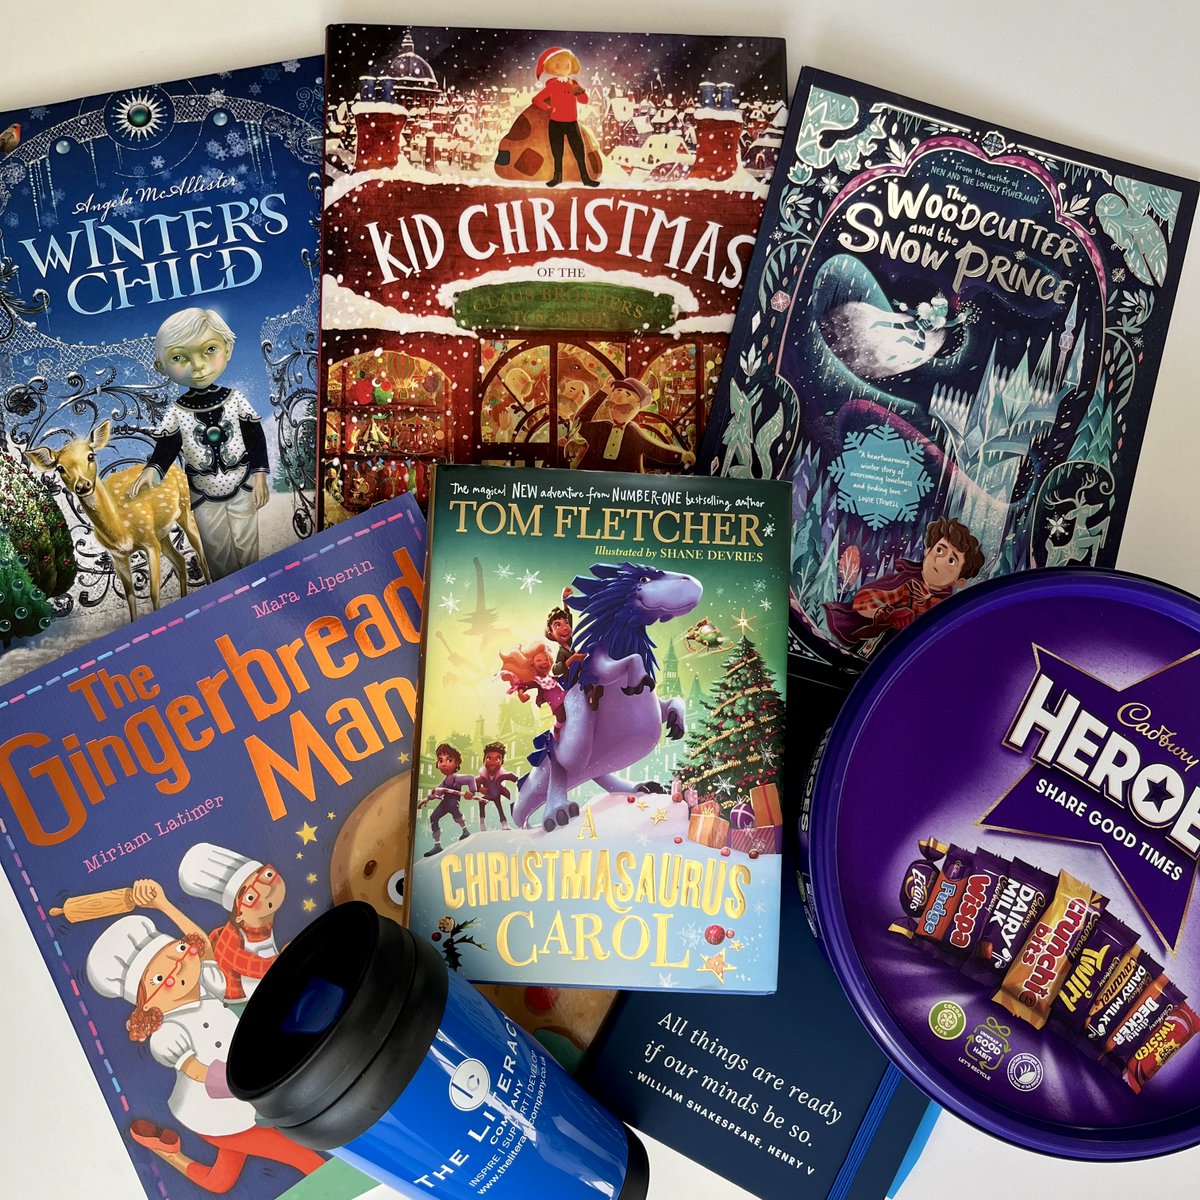 🎄 Christmas giveaway alert! 🎄 To give back to schools this Christmas, we are giving away some wintery books and goodies to get you into the festive mood. For the chance to win, follow us at @TheLCUK and retweet this tweet. Our winner will be drawn on 7/12/23.